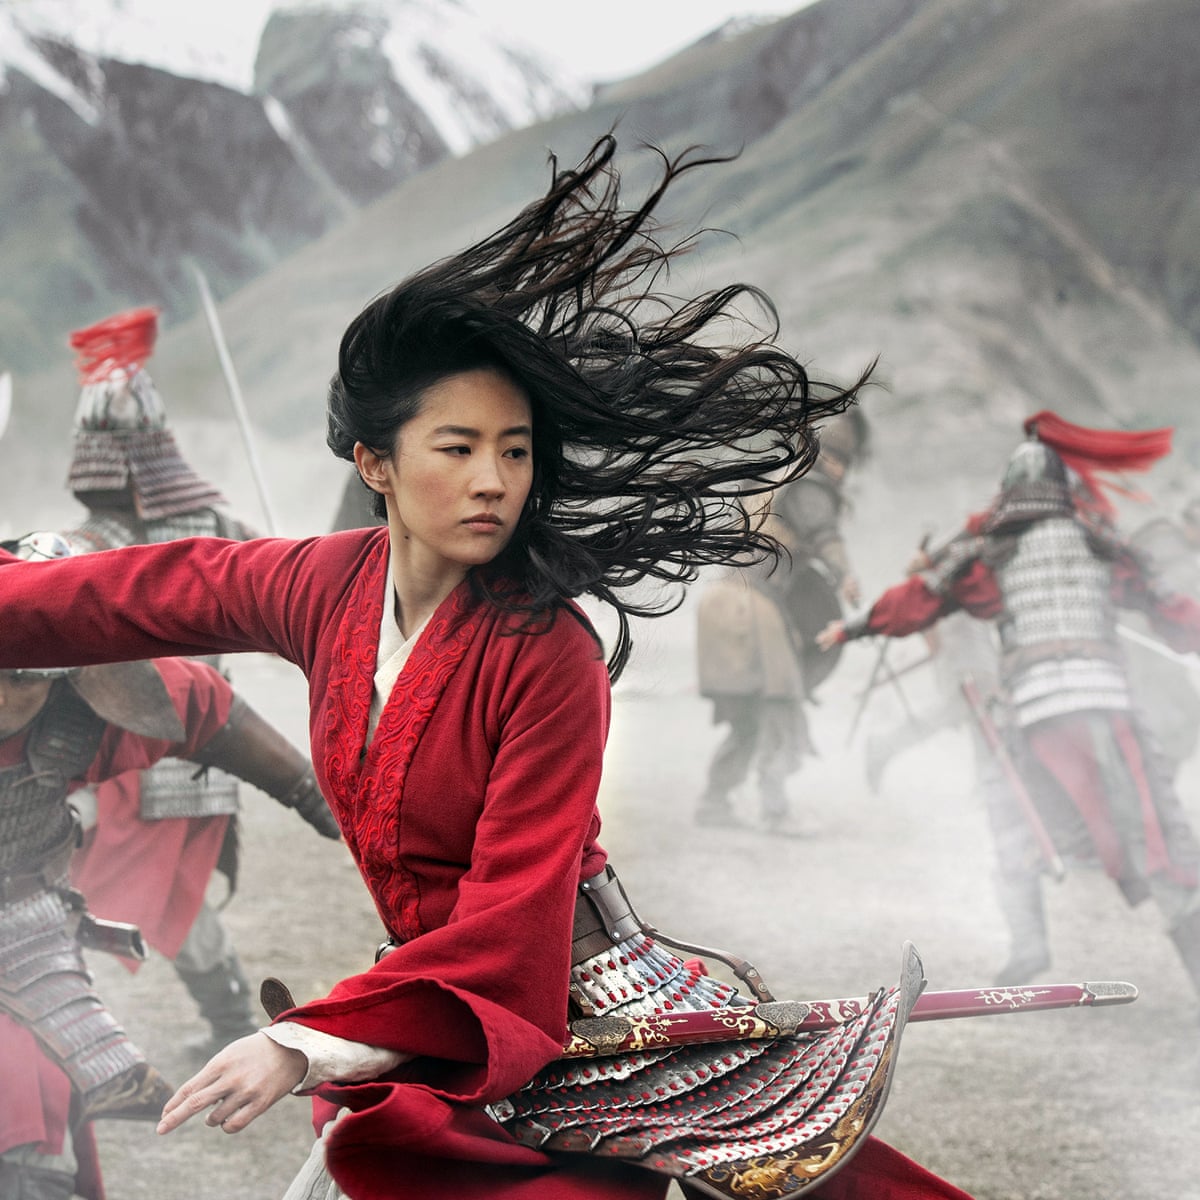 Disney remake of Mulan criticised for filming in Xinjiang | Walt Disney Company | The Guardian